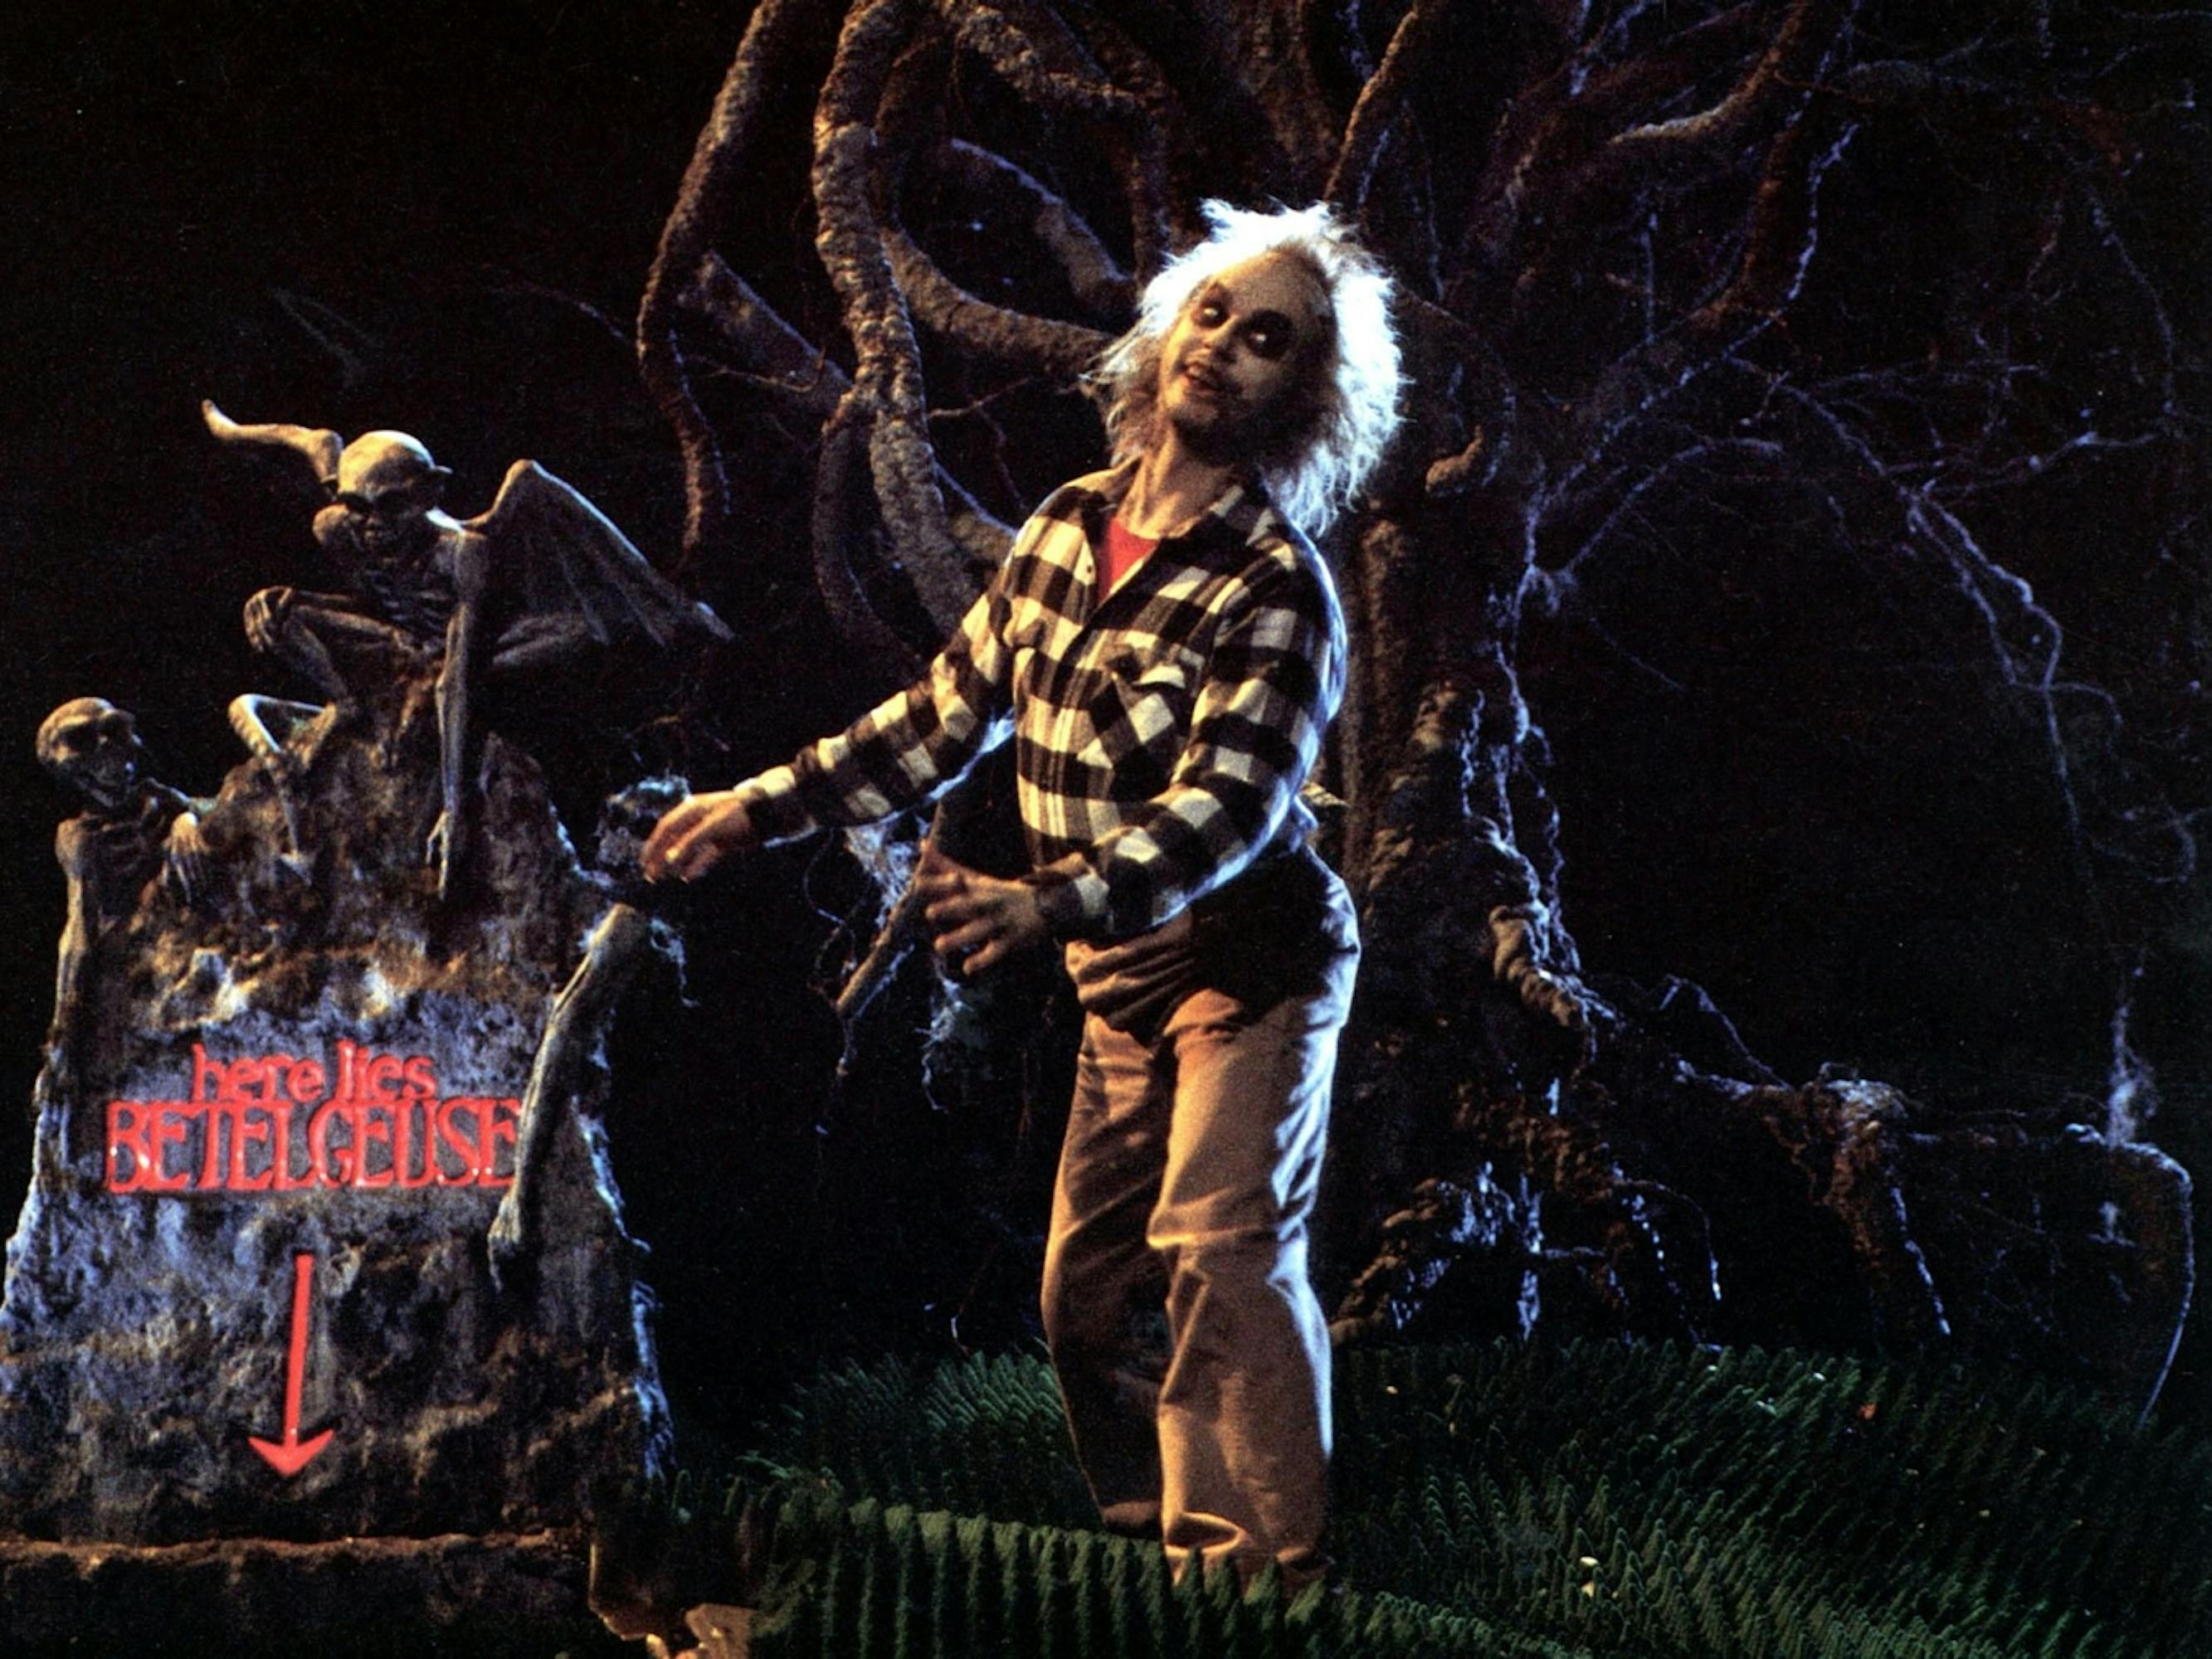 Betelgeuse (Michael Keaton) in Beetlejuice stumbles through gnarled roots, past a grave marked “here lies Betelgeuse.